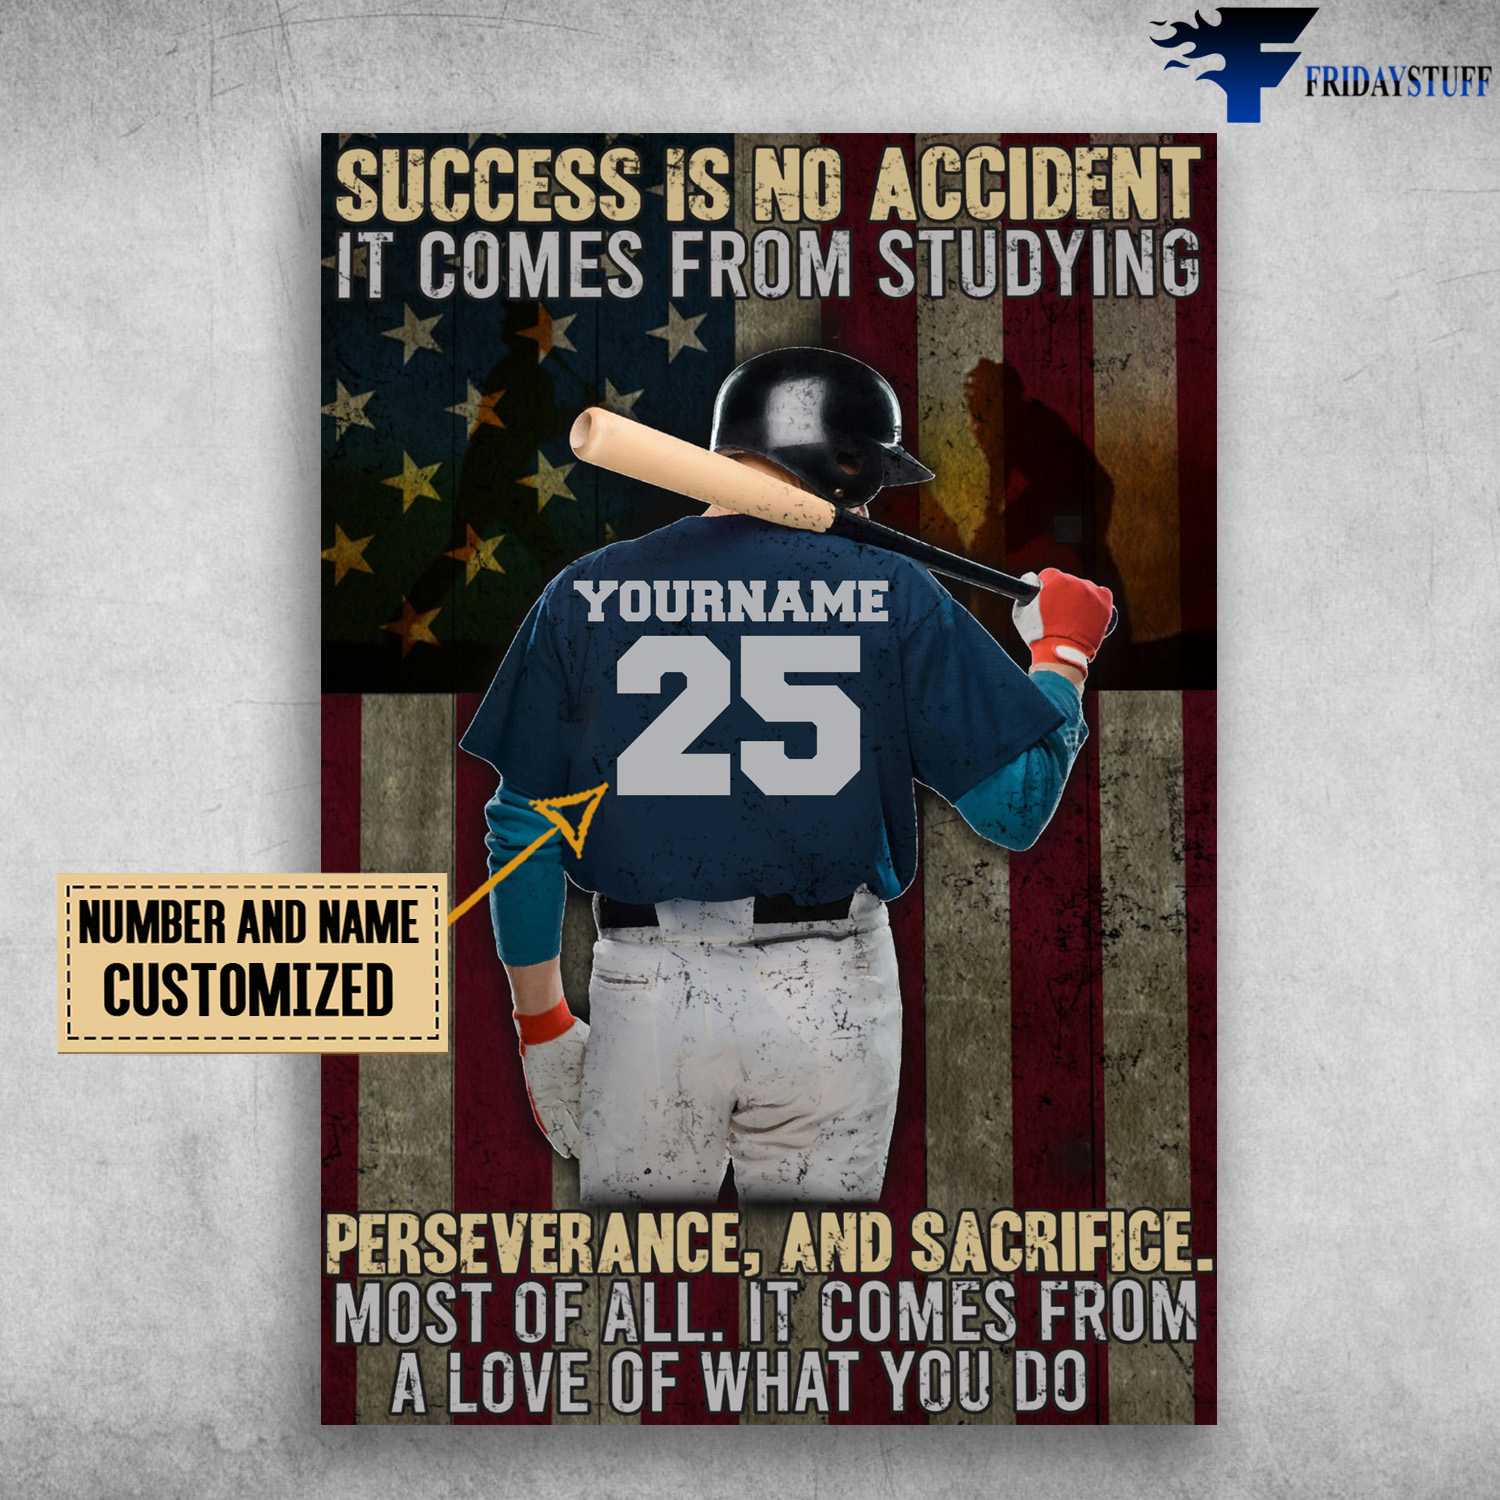 Baseball Man, American Baseball, Success Is Not Accident, It Comes From Studying, Perseverance, And Sacrifice